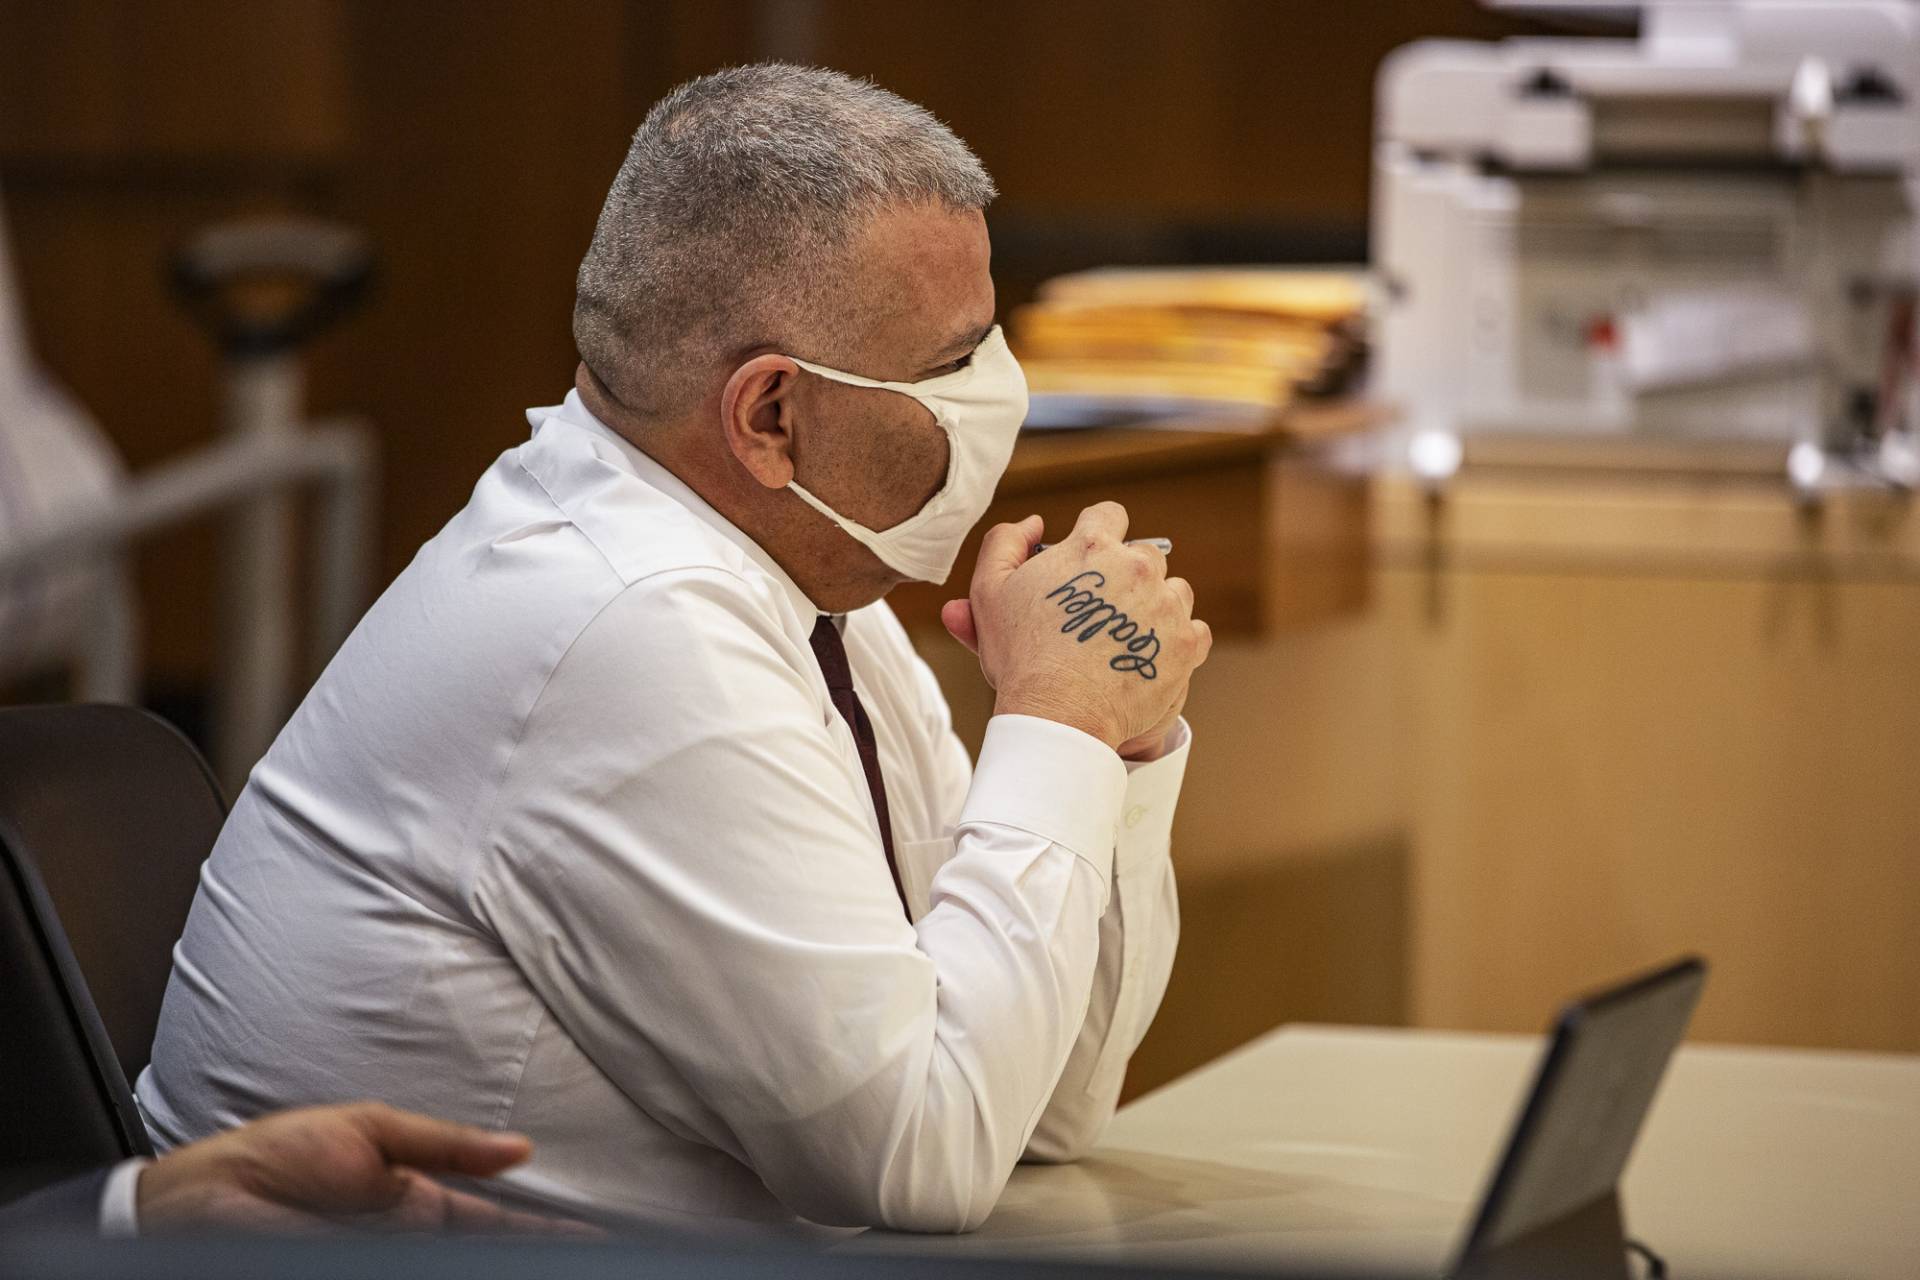 A man wearing a white button down shirt and mask is sitting with his elbows on a desk.